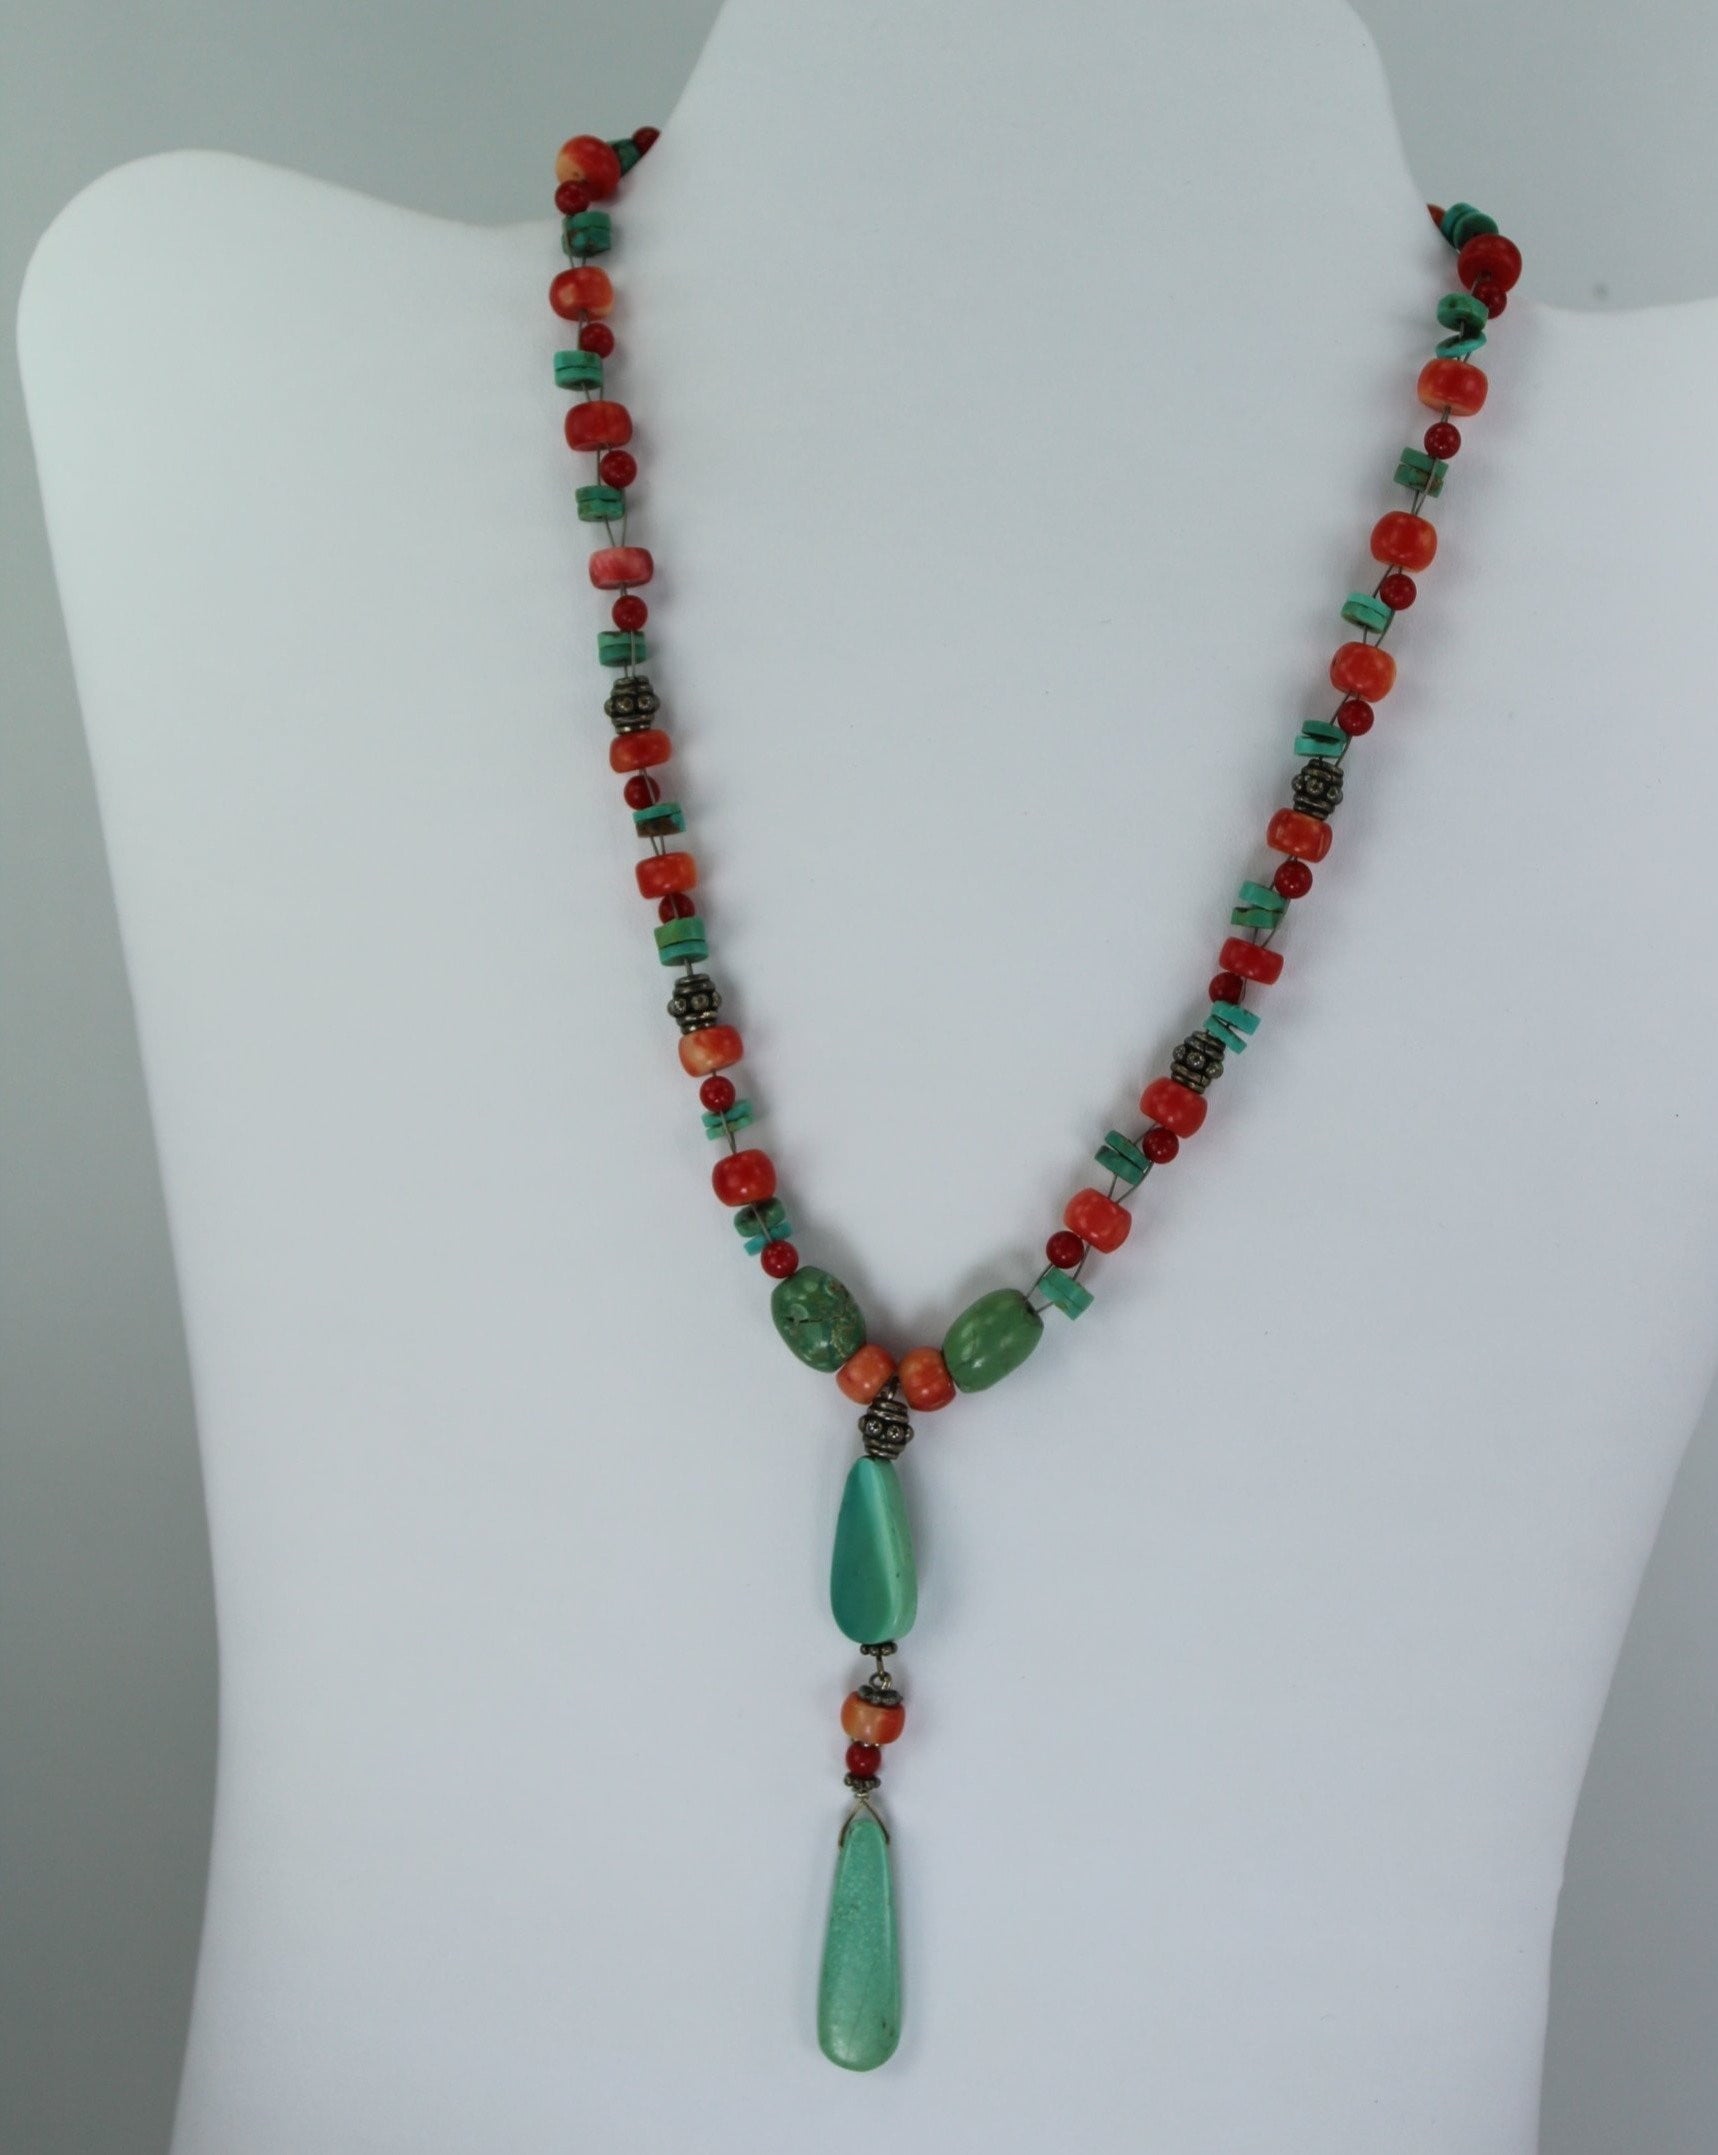 Necklace Turquoise Coral Red Stones Silver Beads Variety Shapes Great Feel Look unusual